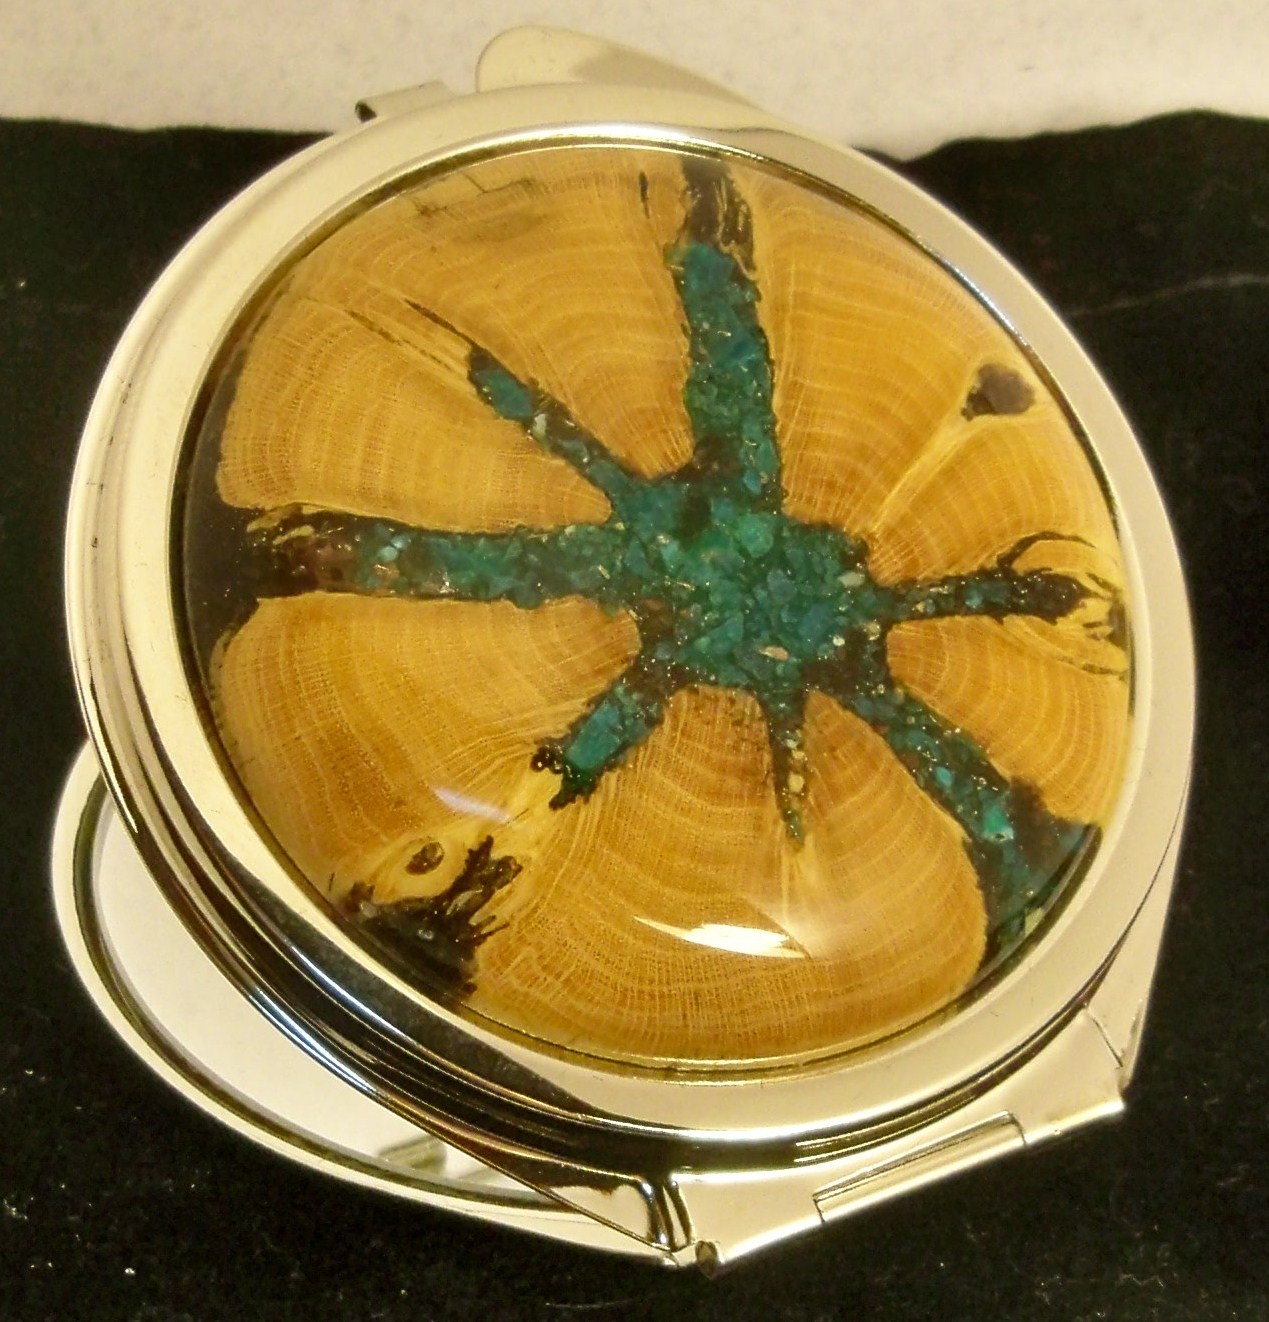 Cholla Cactus Compact Mirror with Turquoise